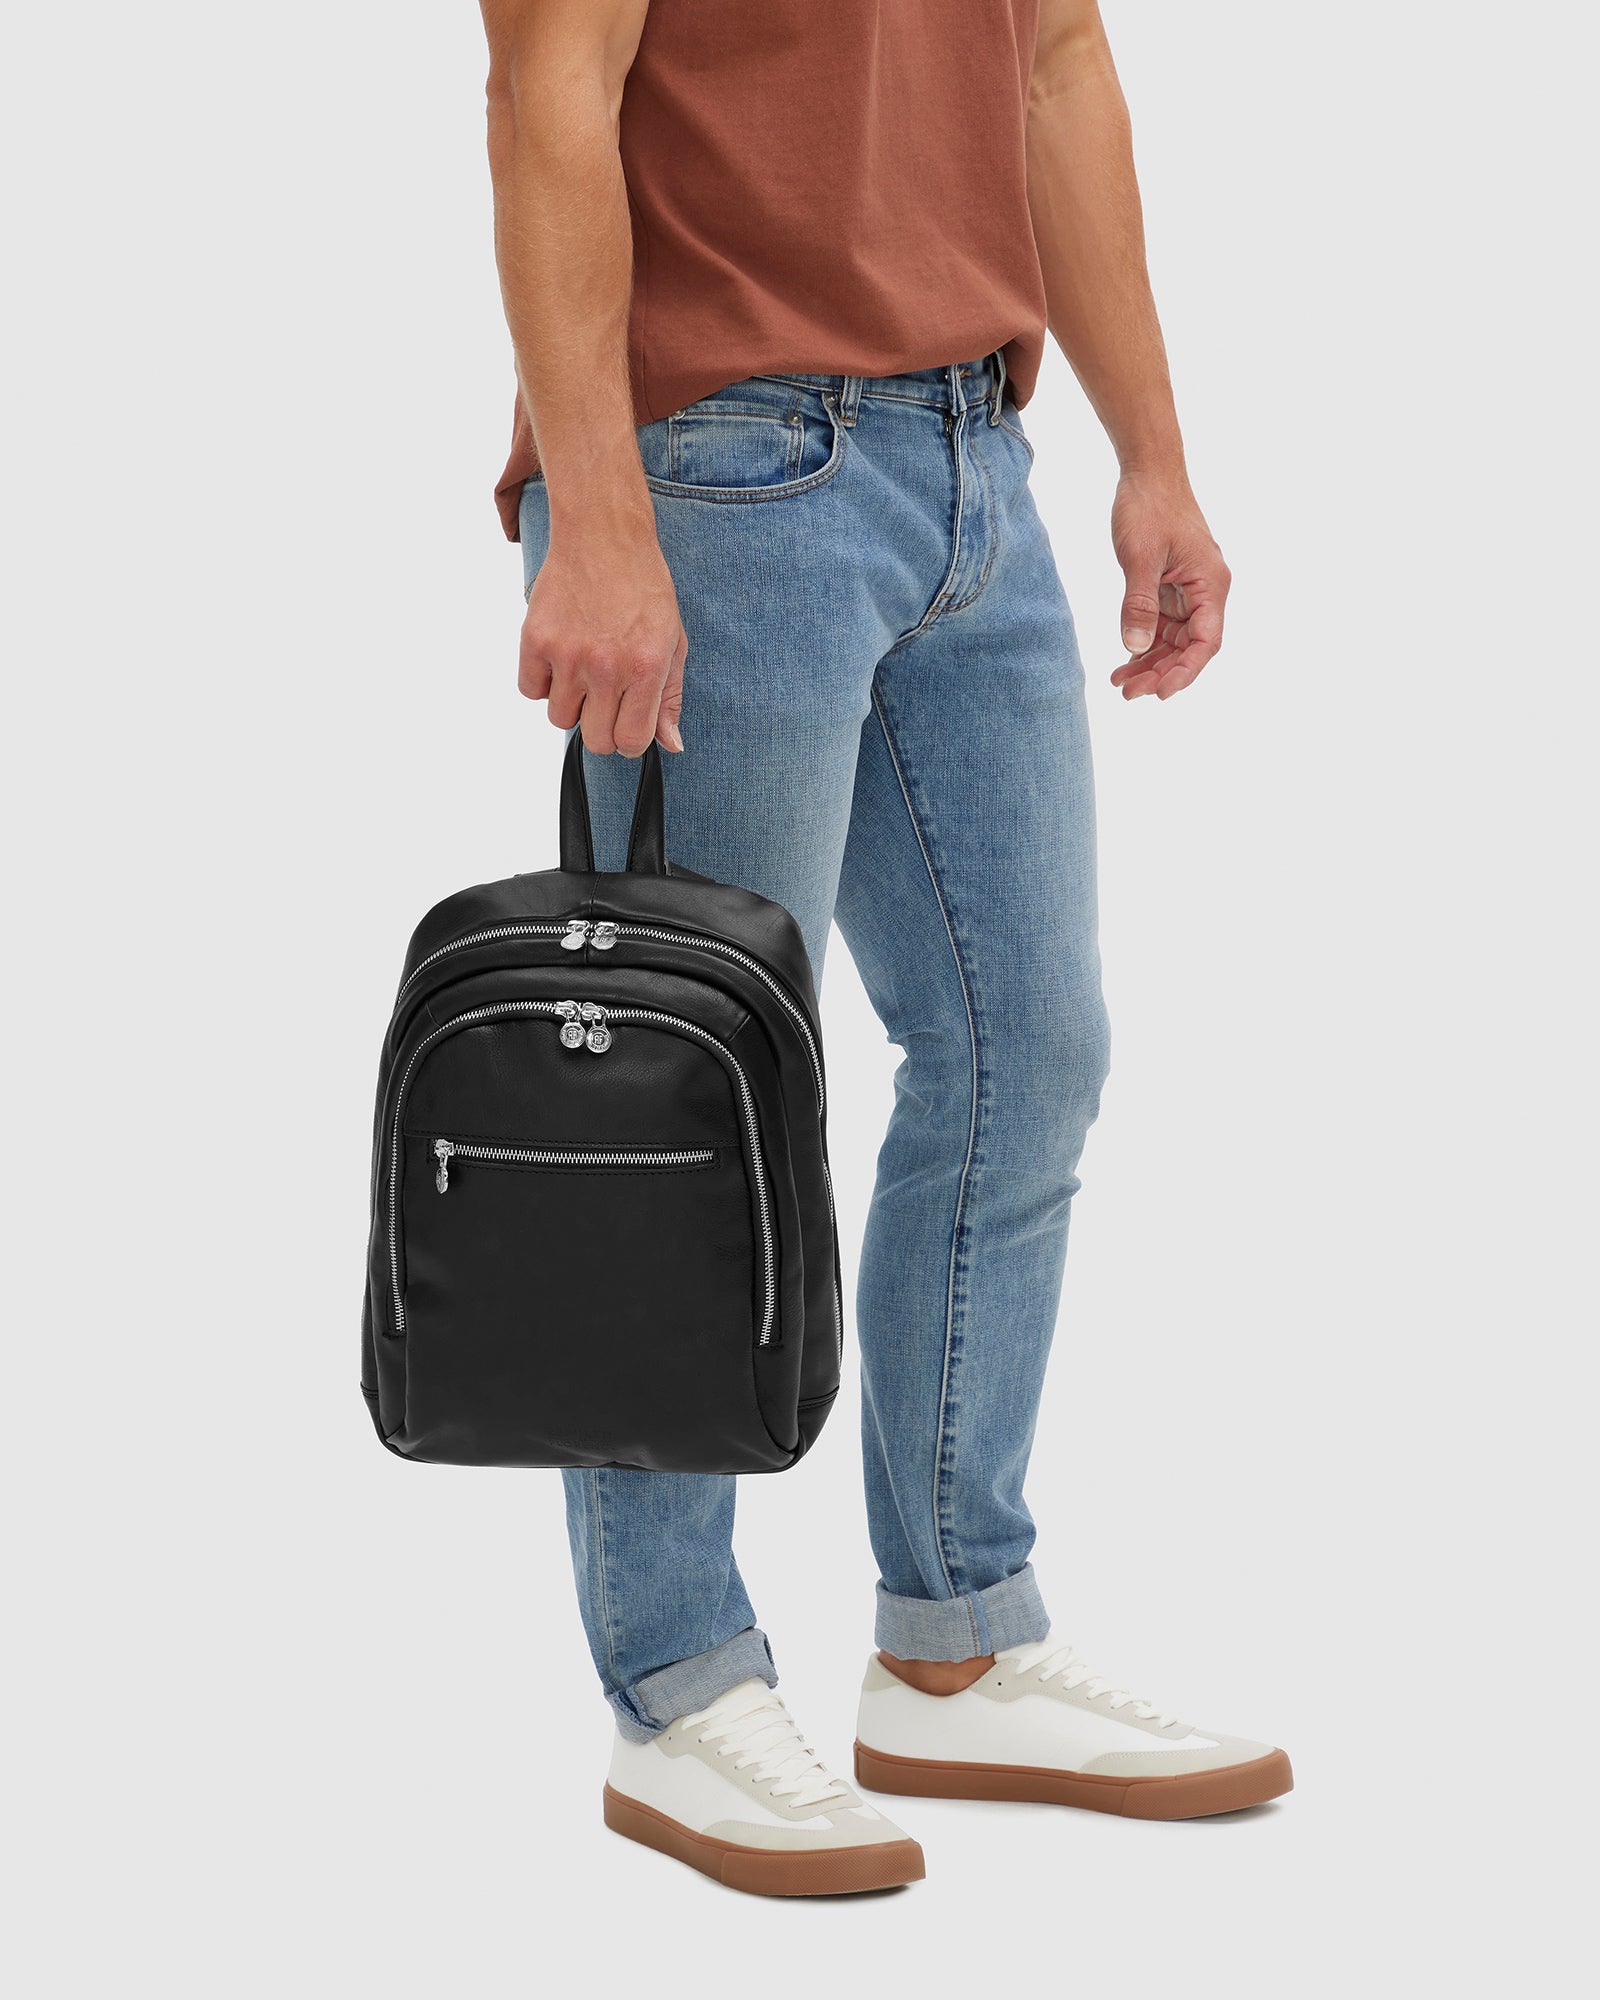 Archy Black- Leather Backpack 13" laptop